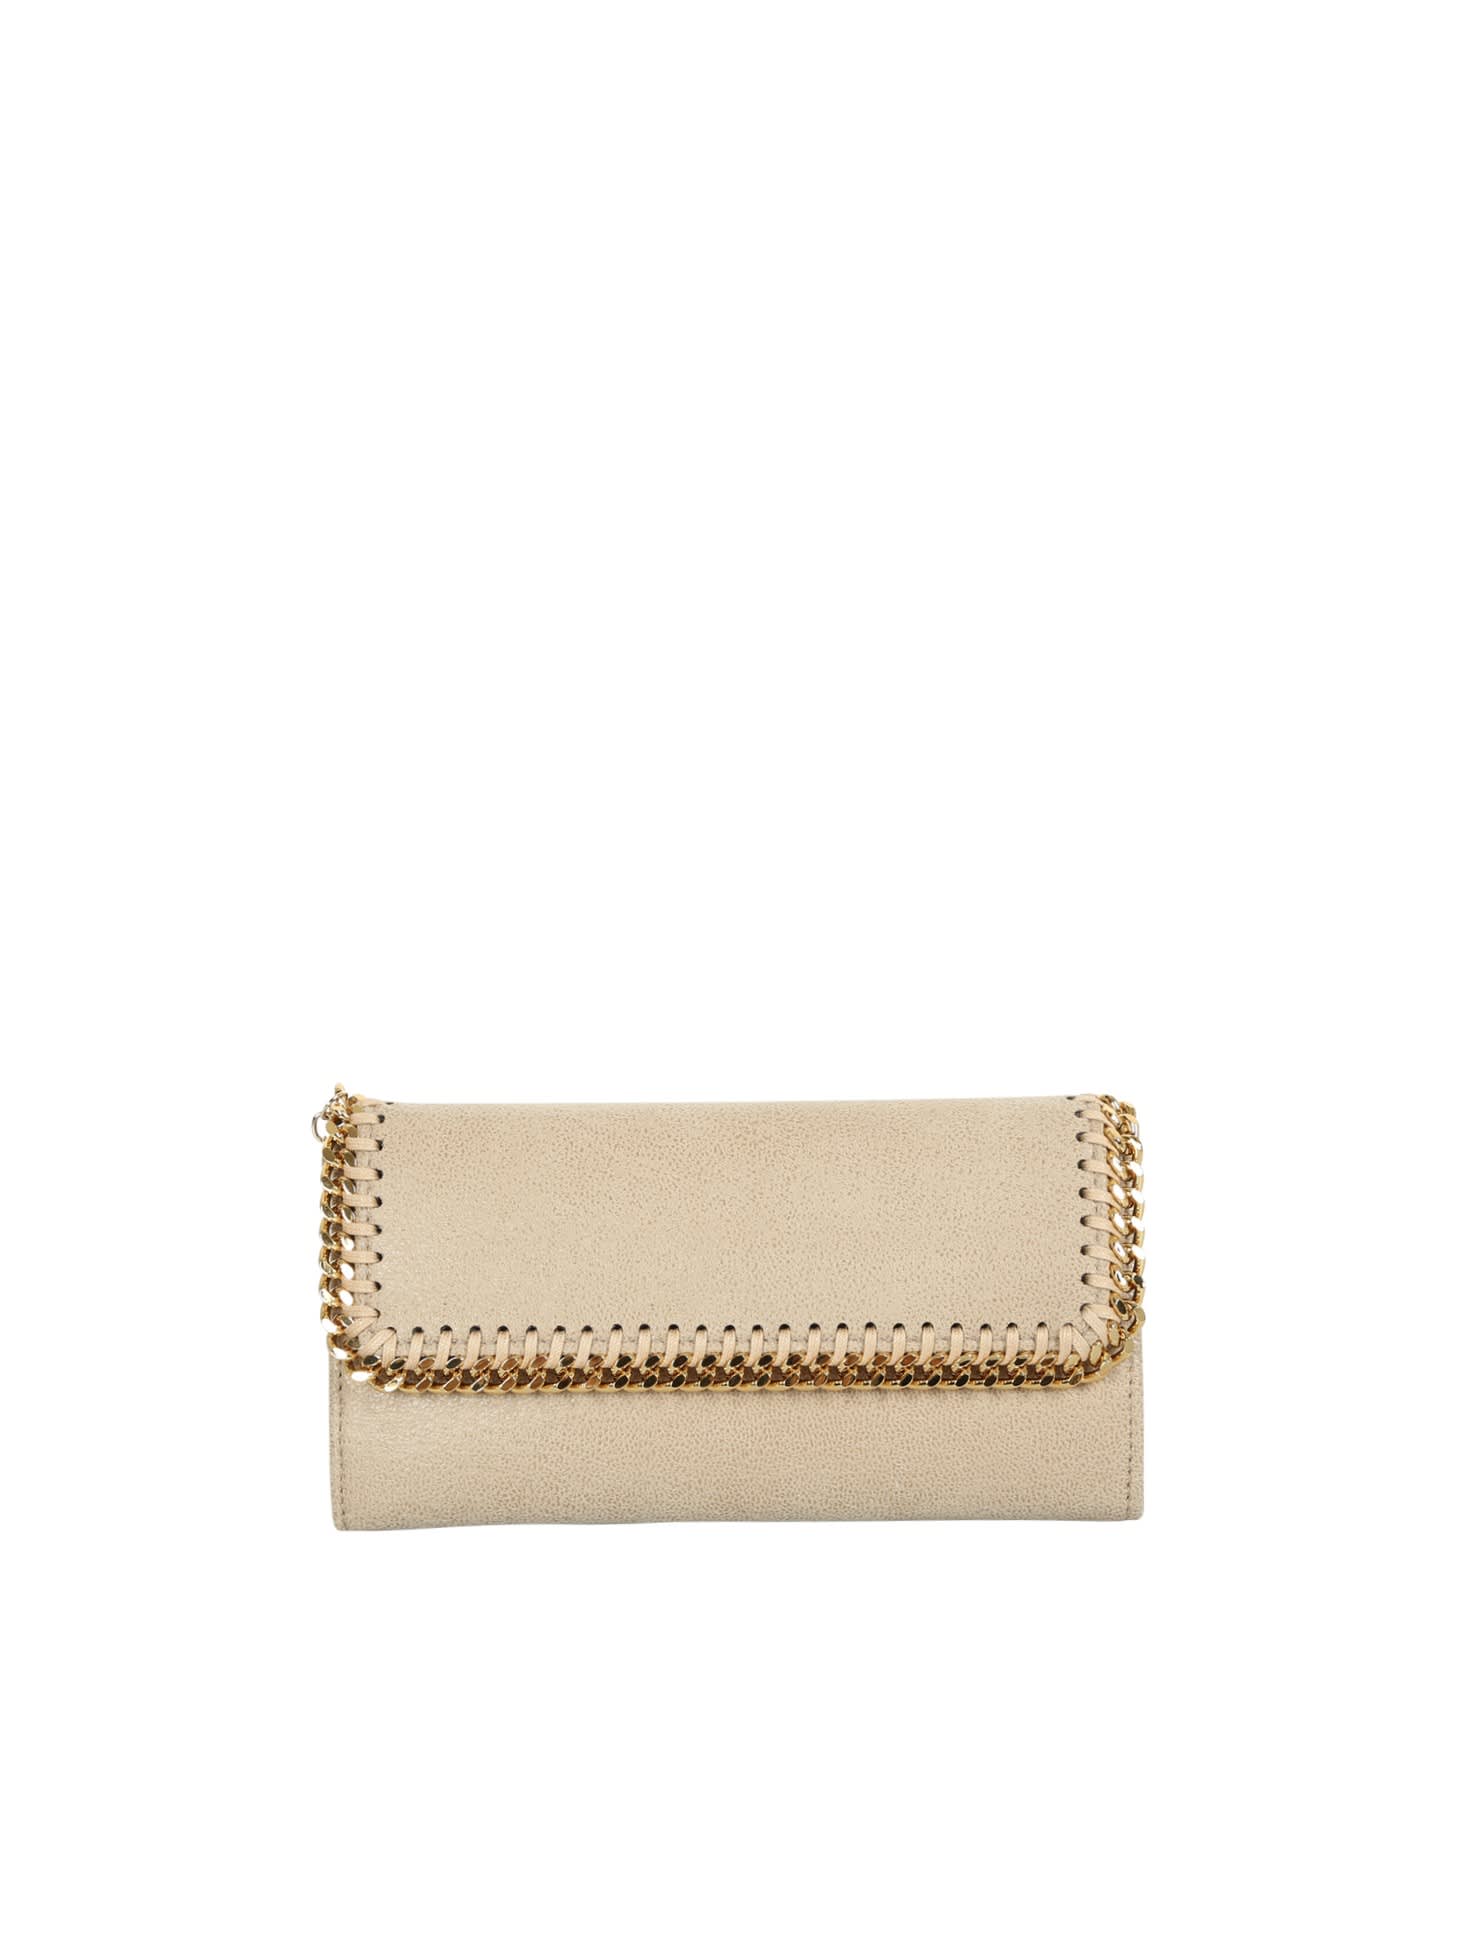 STELLA MCCARTNEY FOR LOVERS OF THE UNMISTAKABLE FALABELLA STYLE, THIS WALLET IS FOR YOU. PRACTICAL AND REFINED.